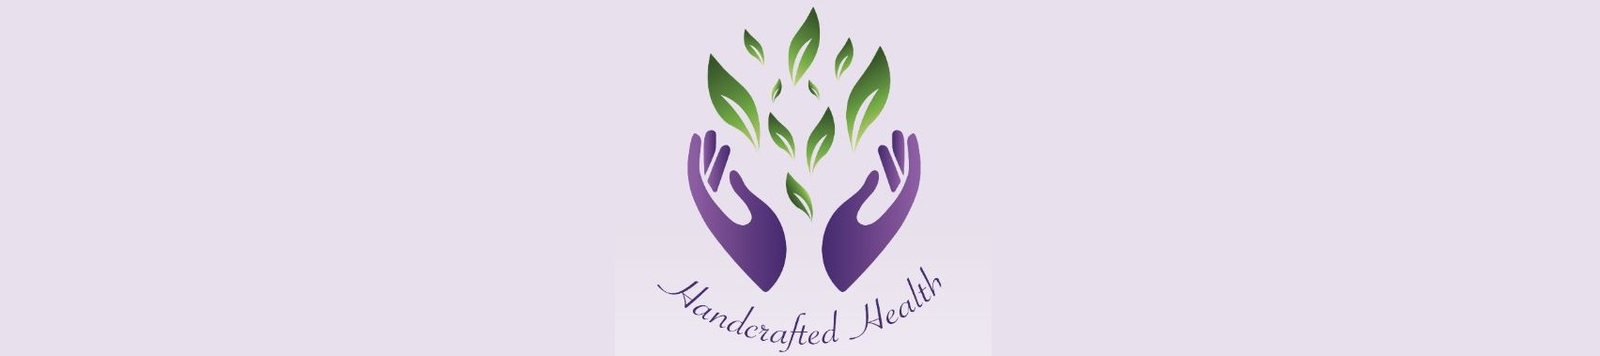 Handcrafted Health